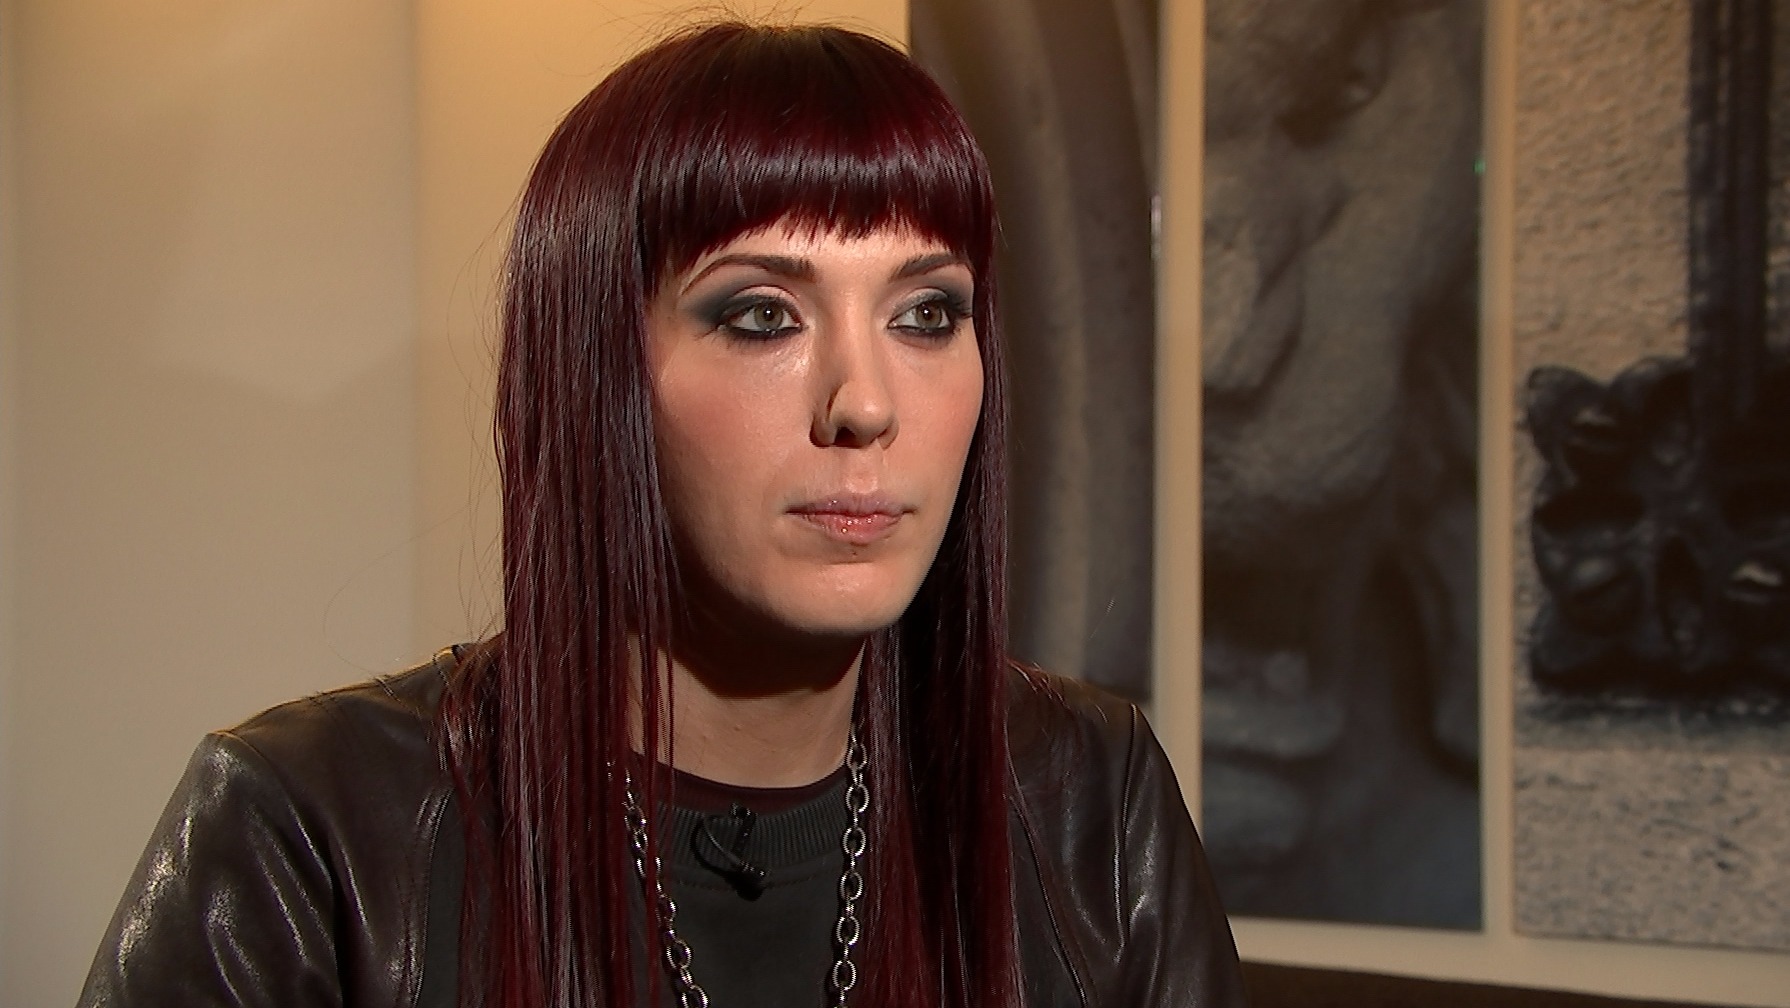 Paris Lees on being trans and incarcerated | ITV News